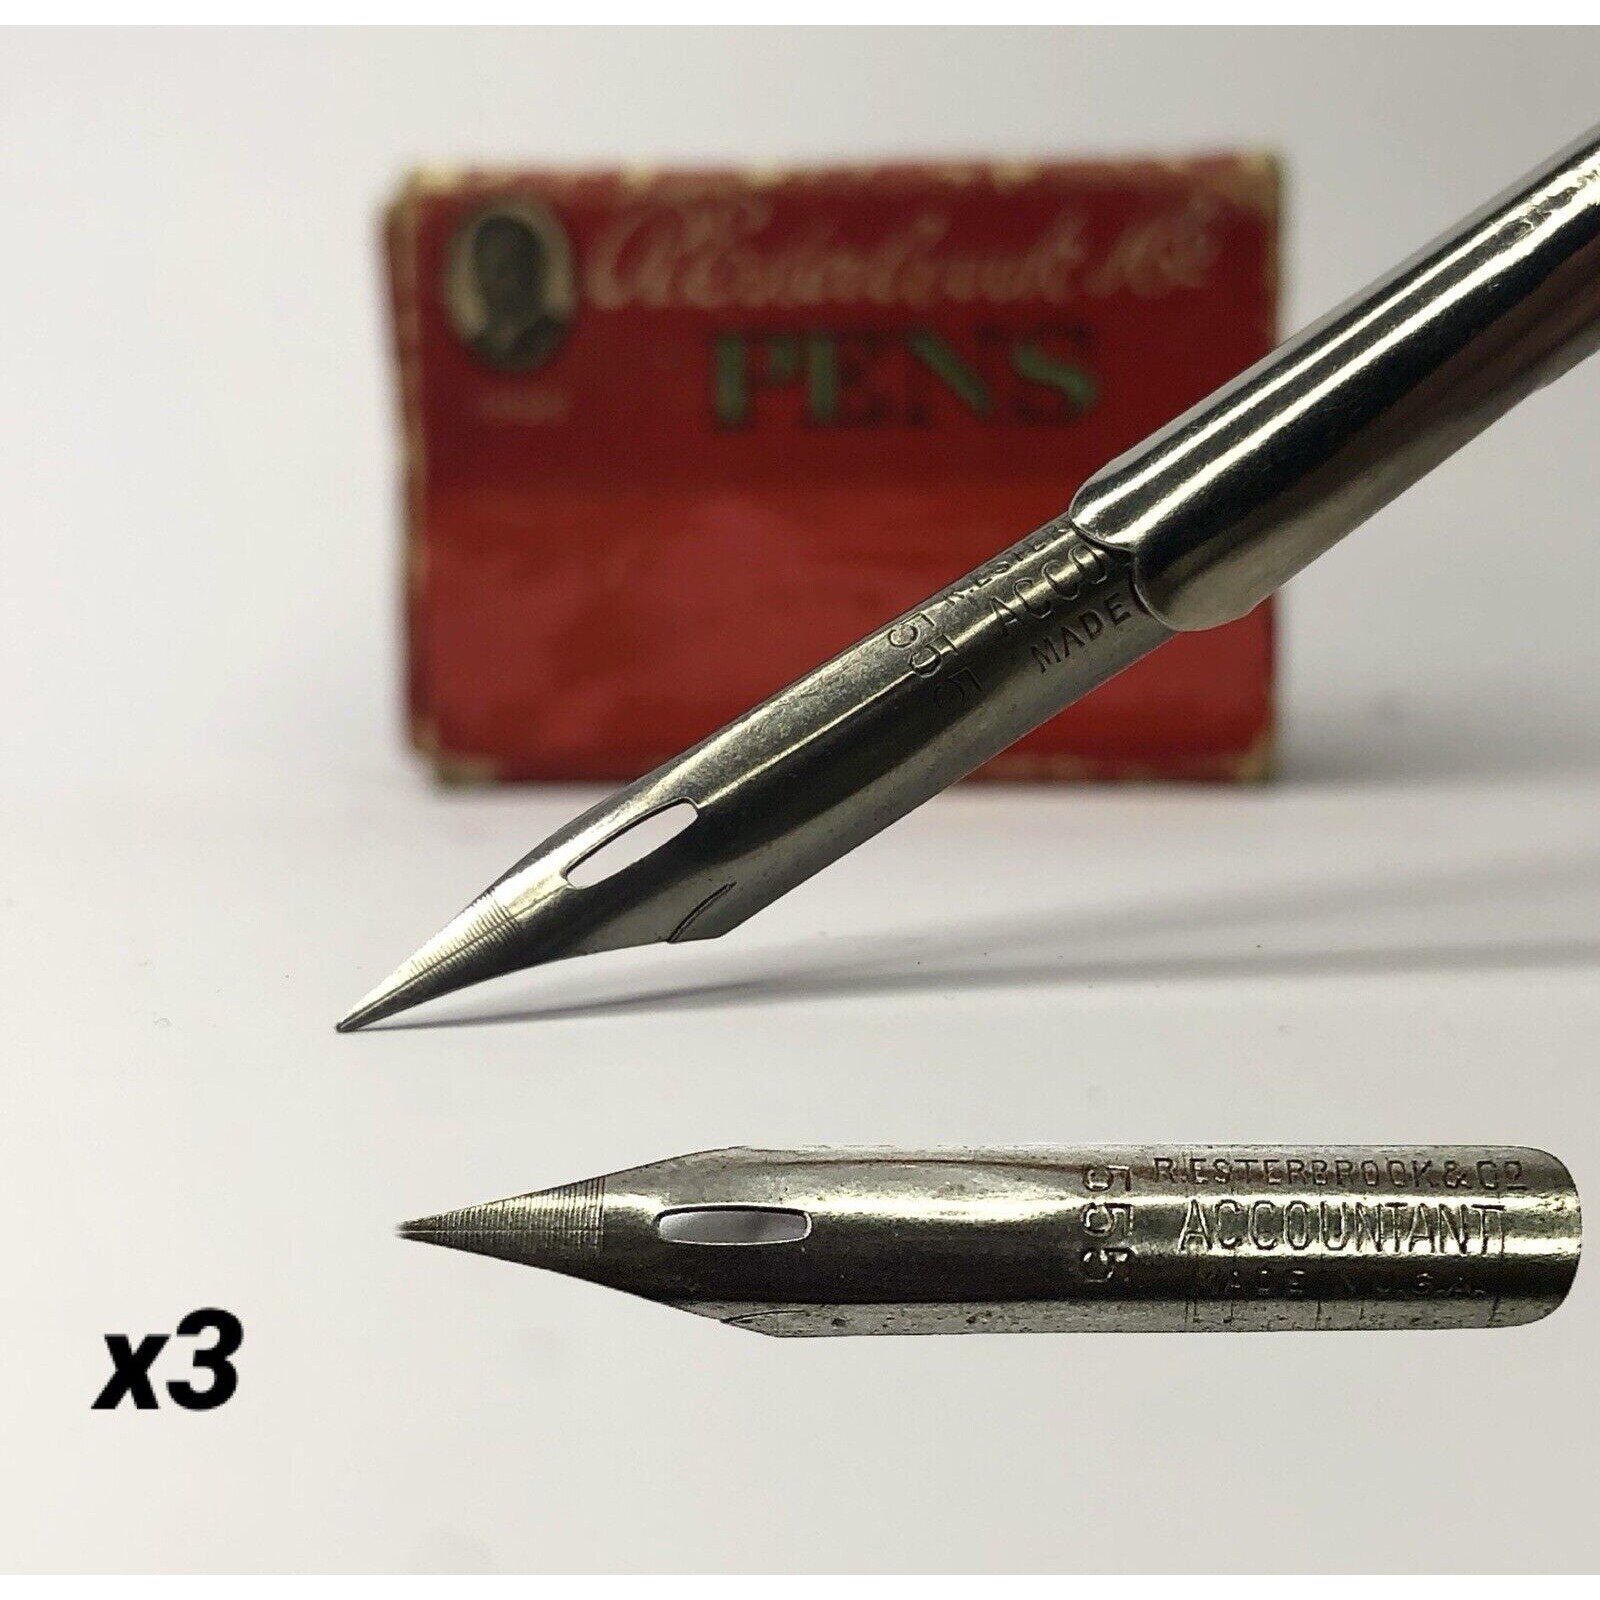 WIRE NIB #8: Woodburning Tips And Their Uses - Quill Nib 